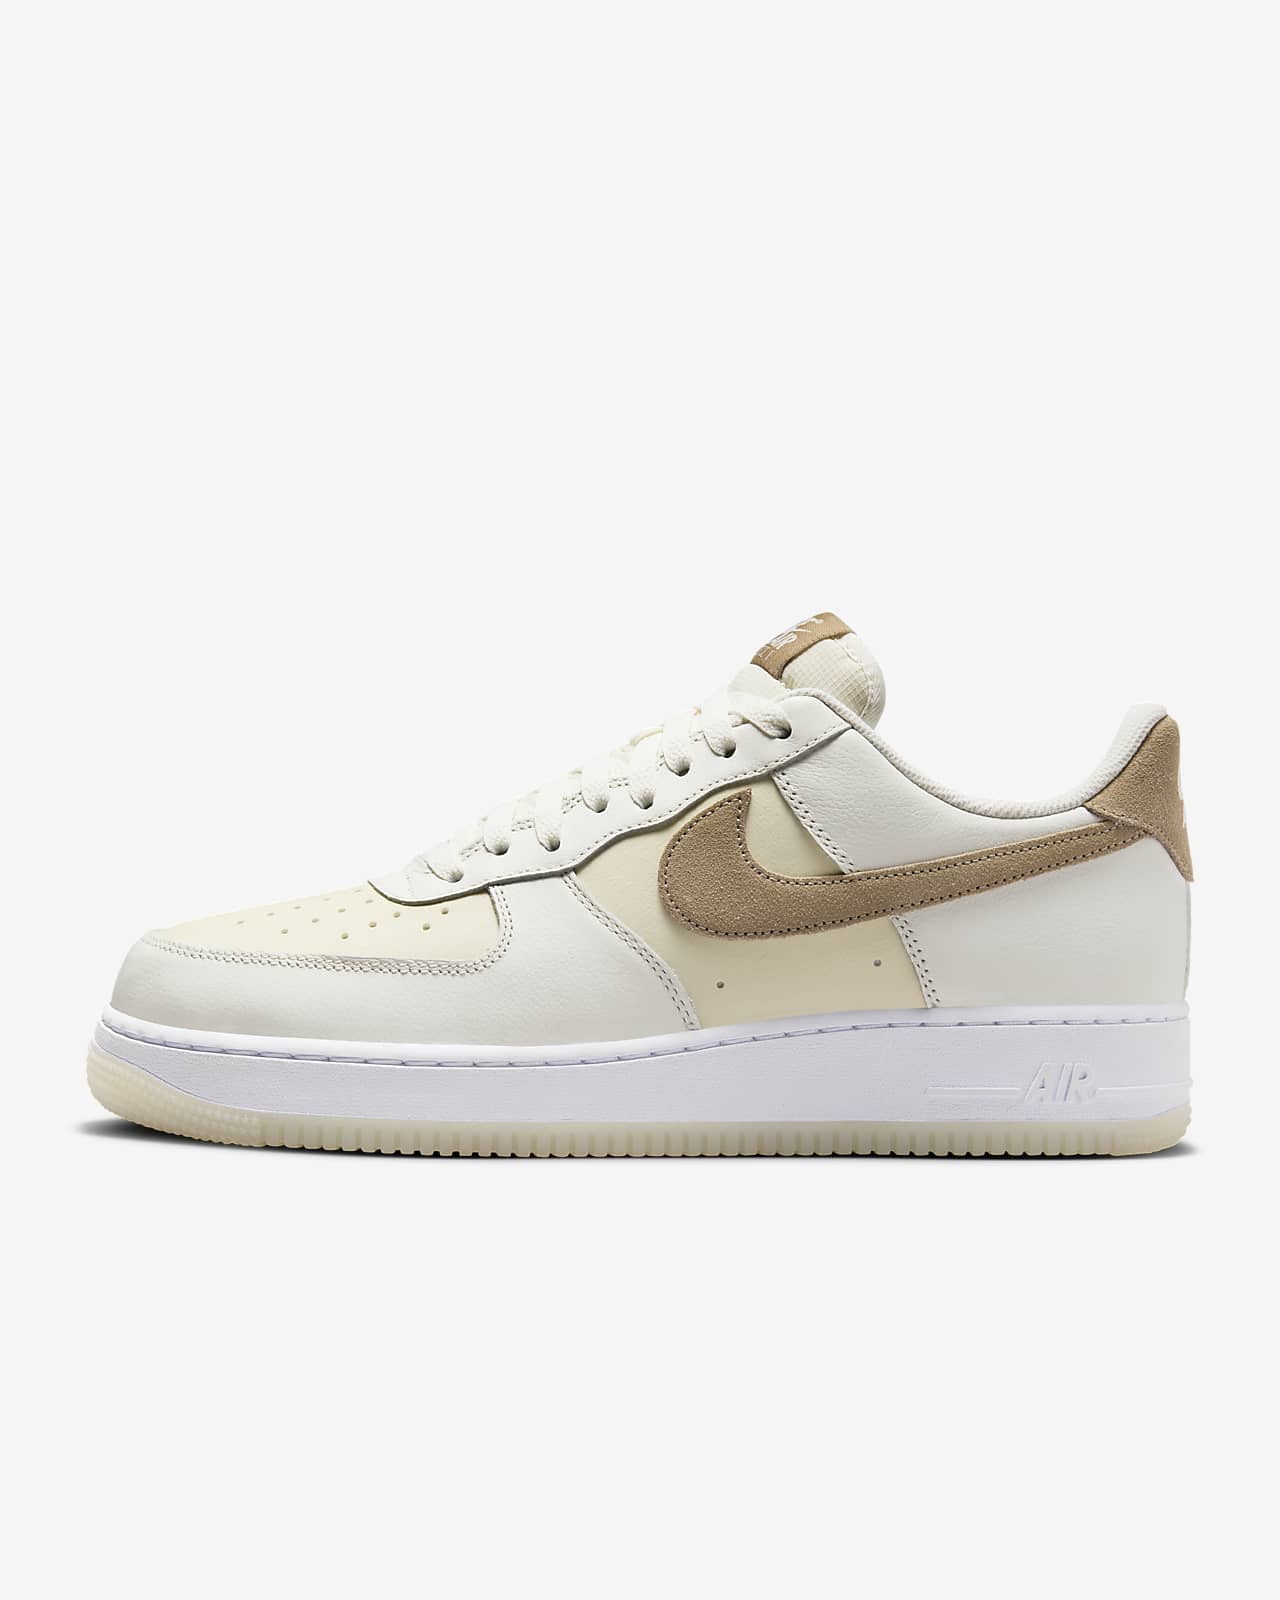 Chaussure Nike Air Force 1 '07 LV8 pour homme